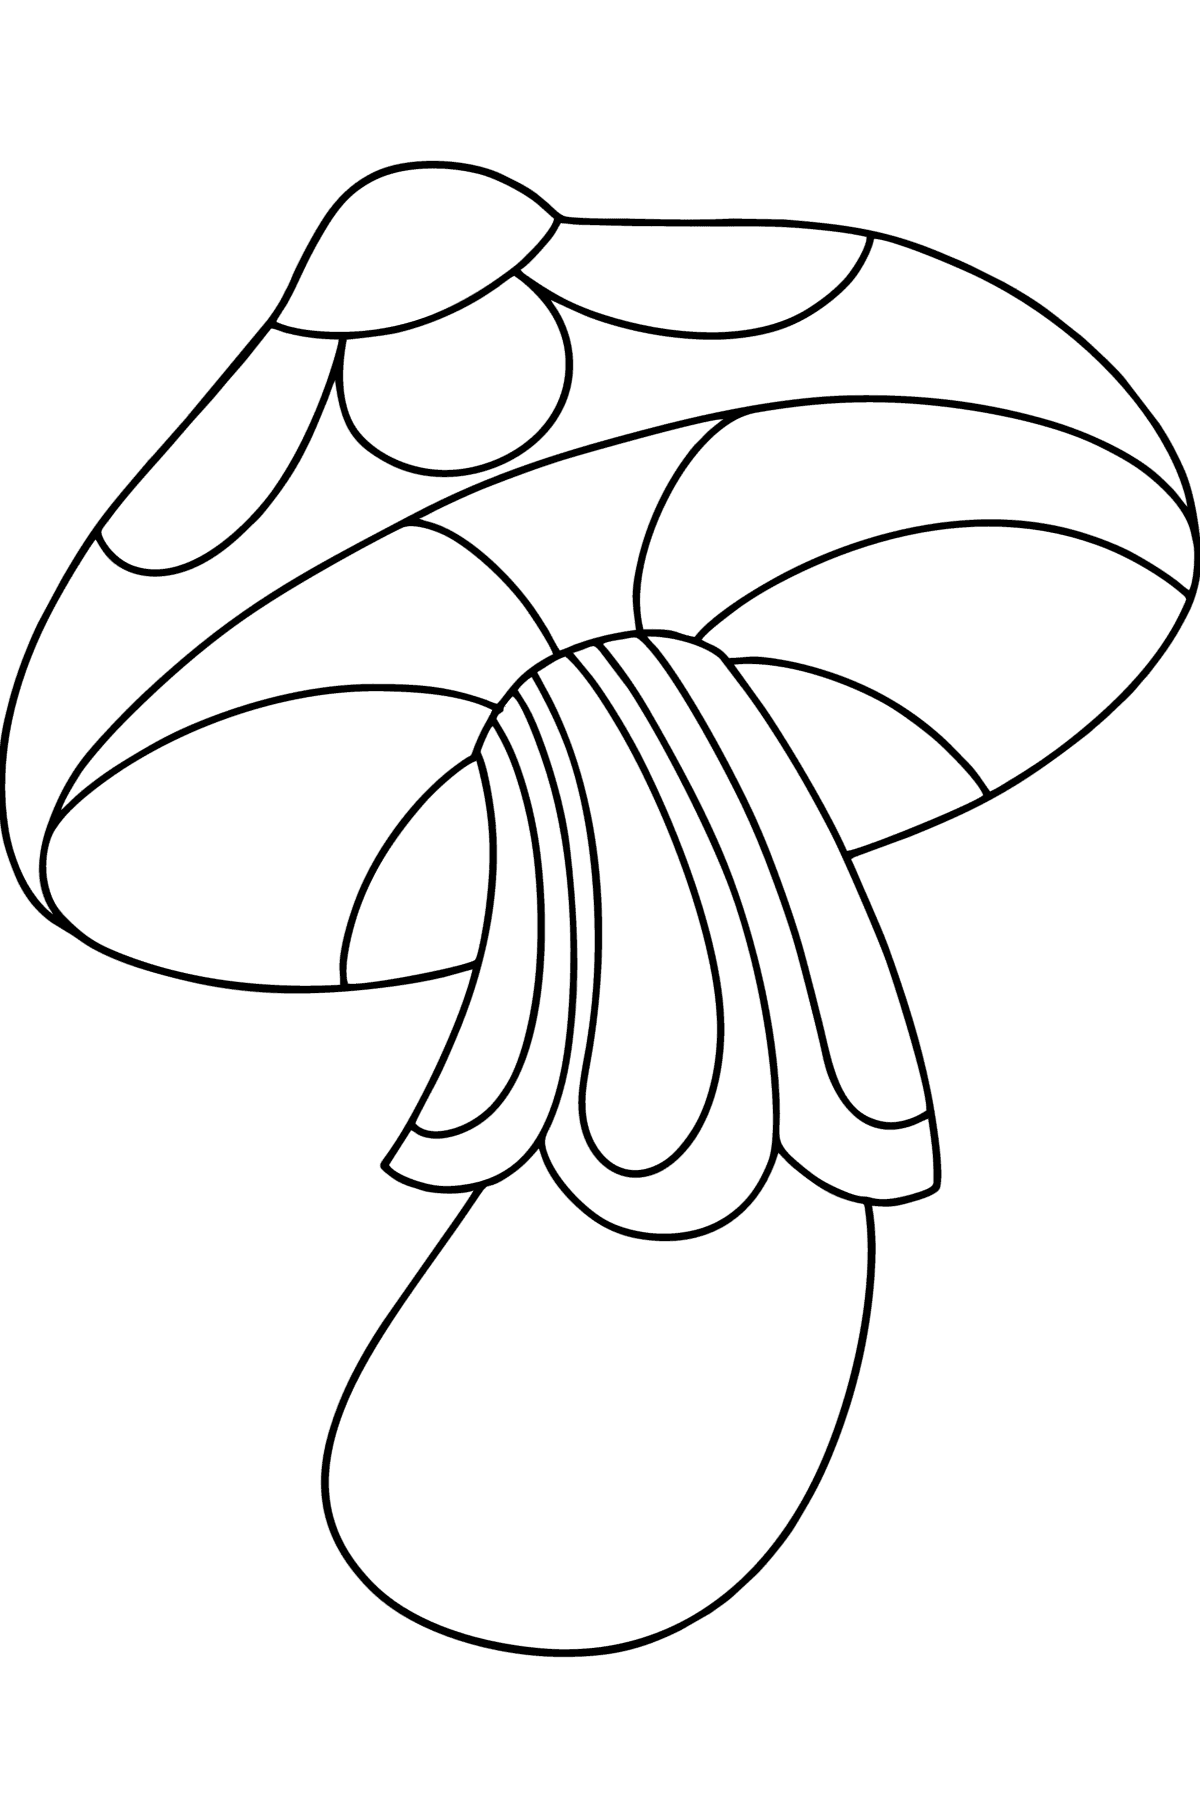 Zentangle mushroom coloring page - Coloring Pages for Kids